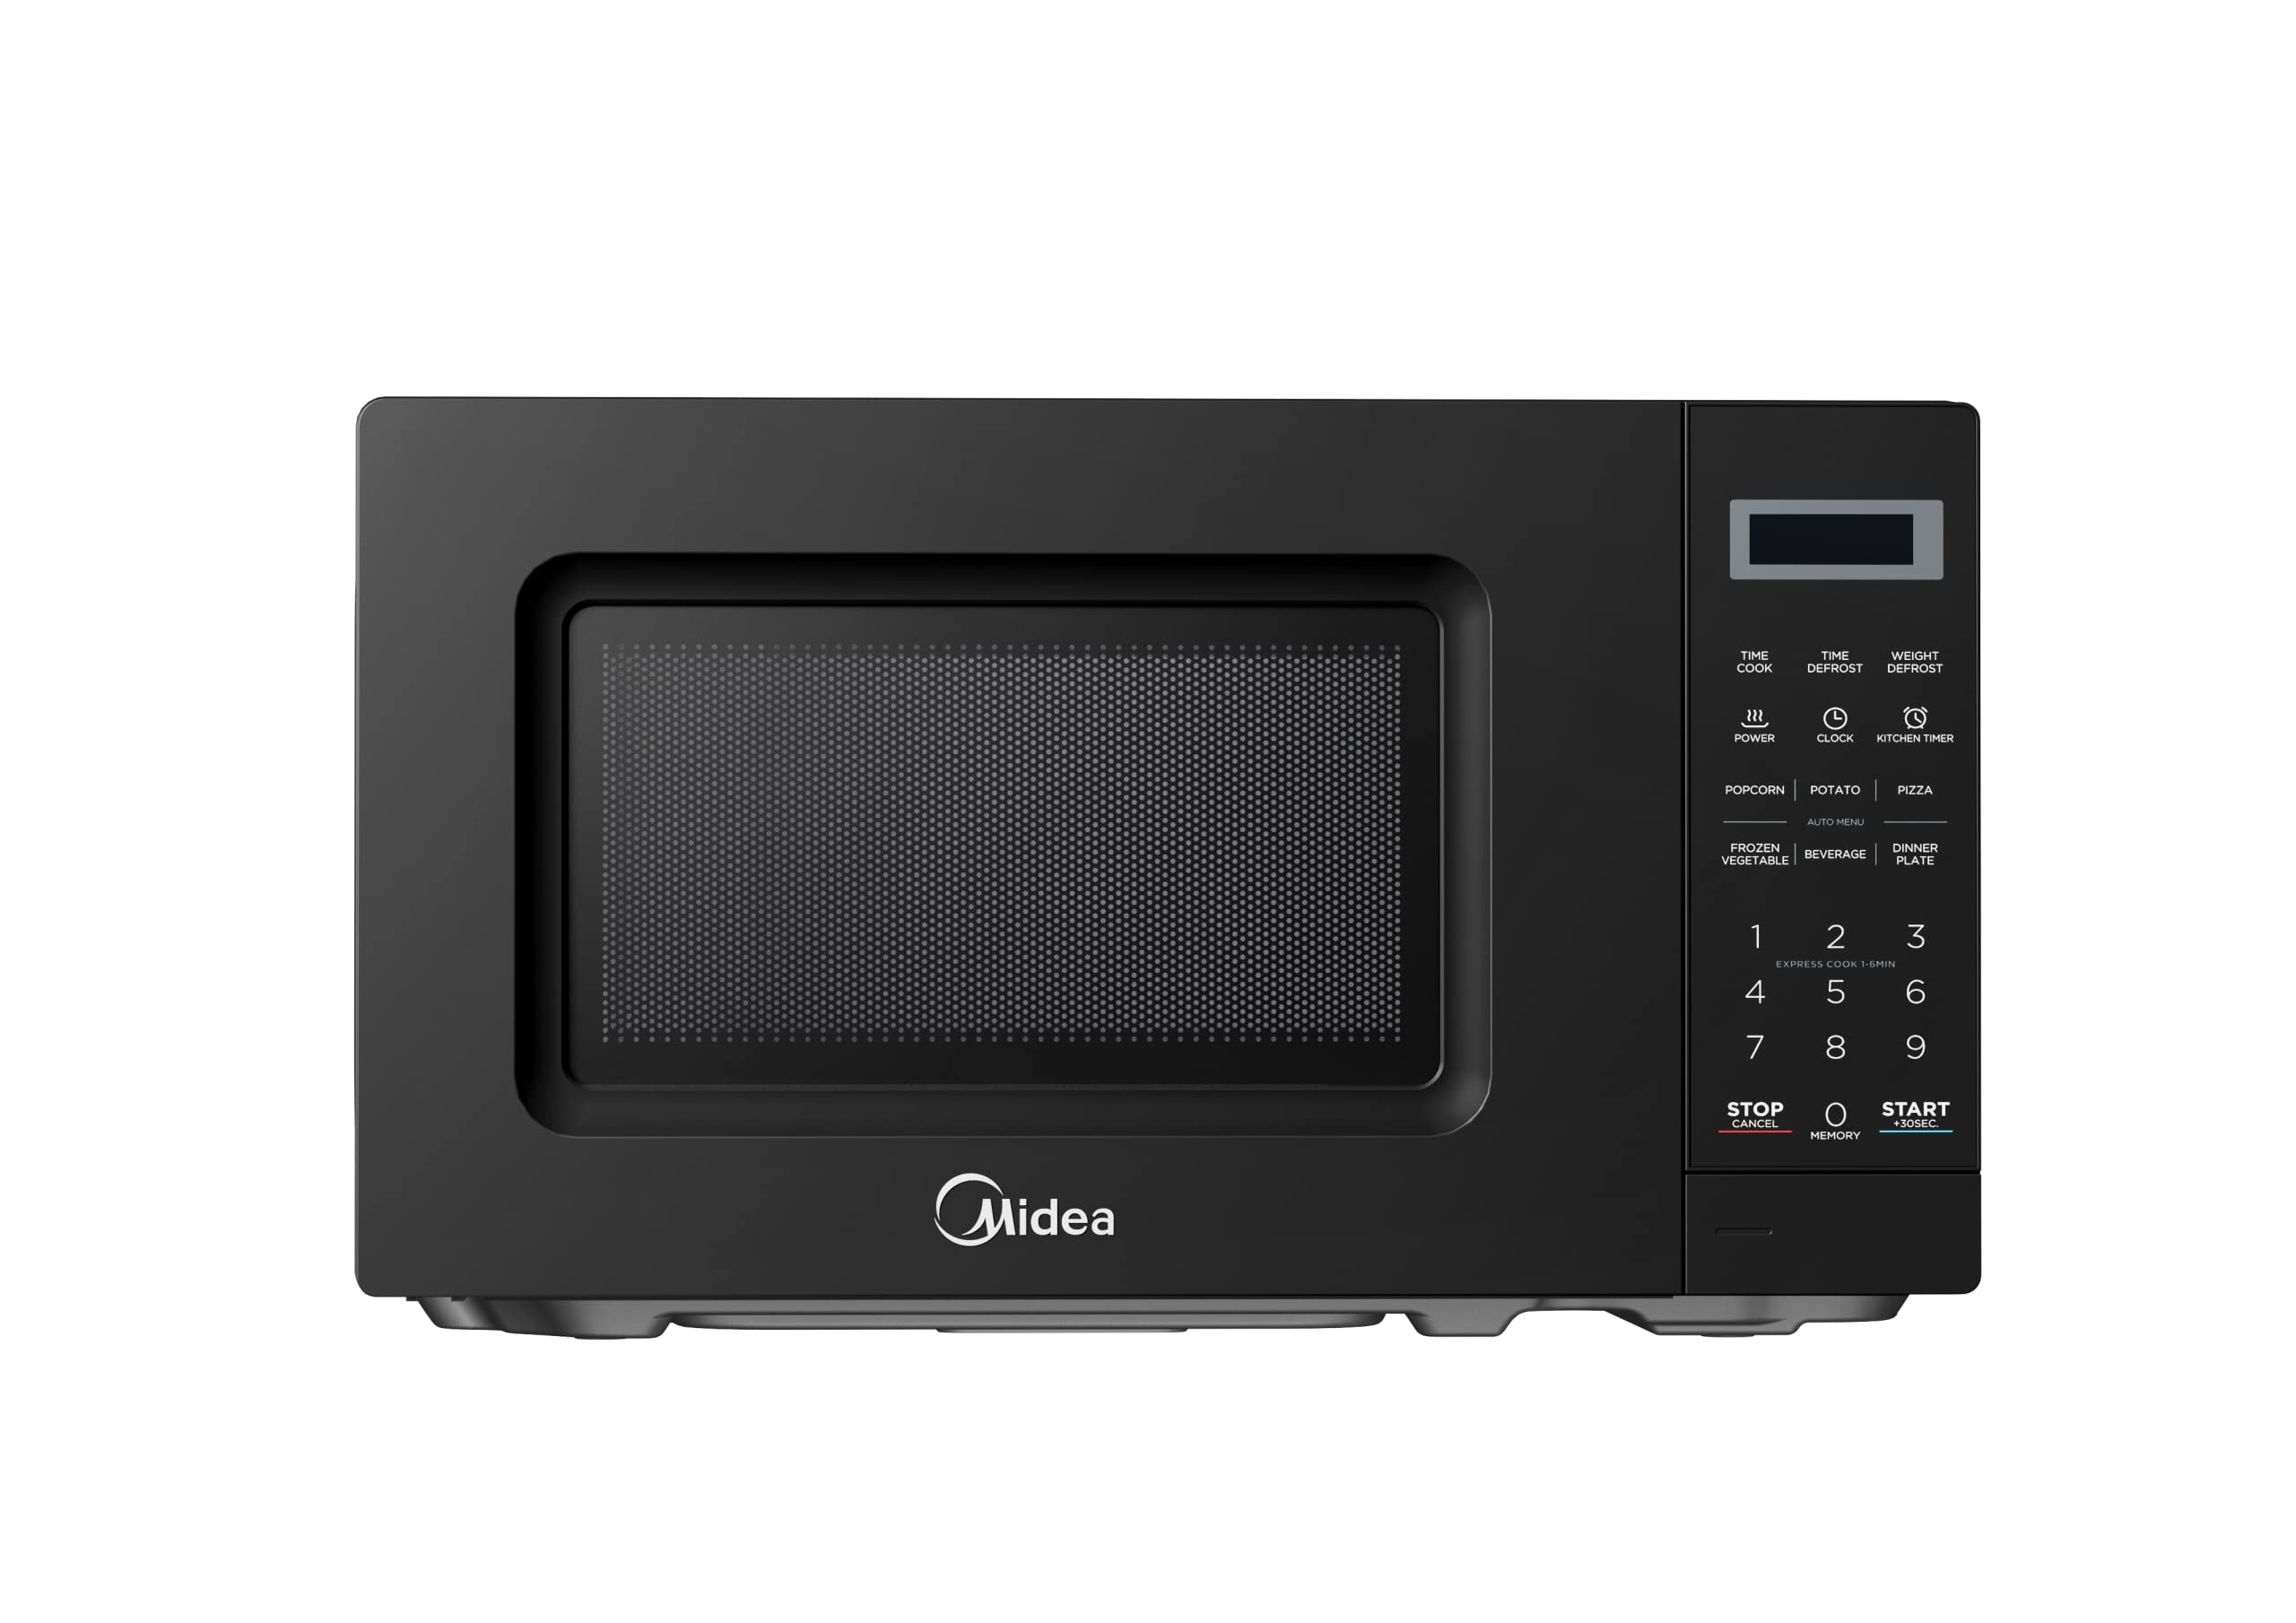 Midea 20L Solo Microwave Oven with Digital Touch Control, 700W, Child Lock, Memory Function, Defrost-by-weight-or-time, Fast Reheat, Push Button Door Opening, Best for Home & Office, Black, EM721BK